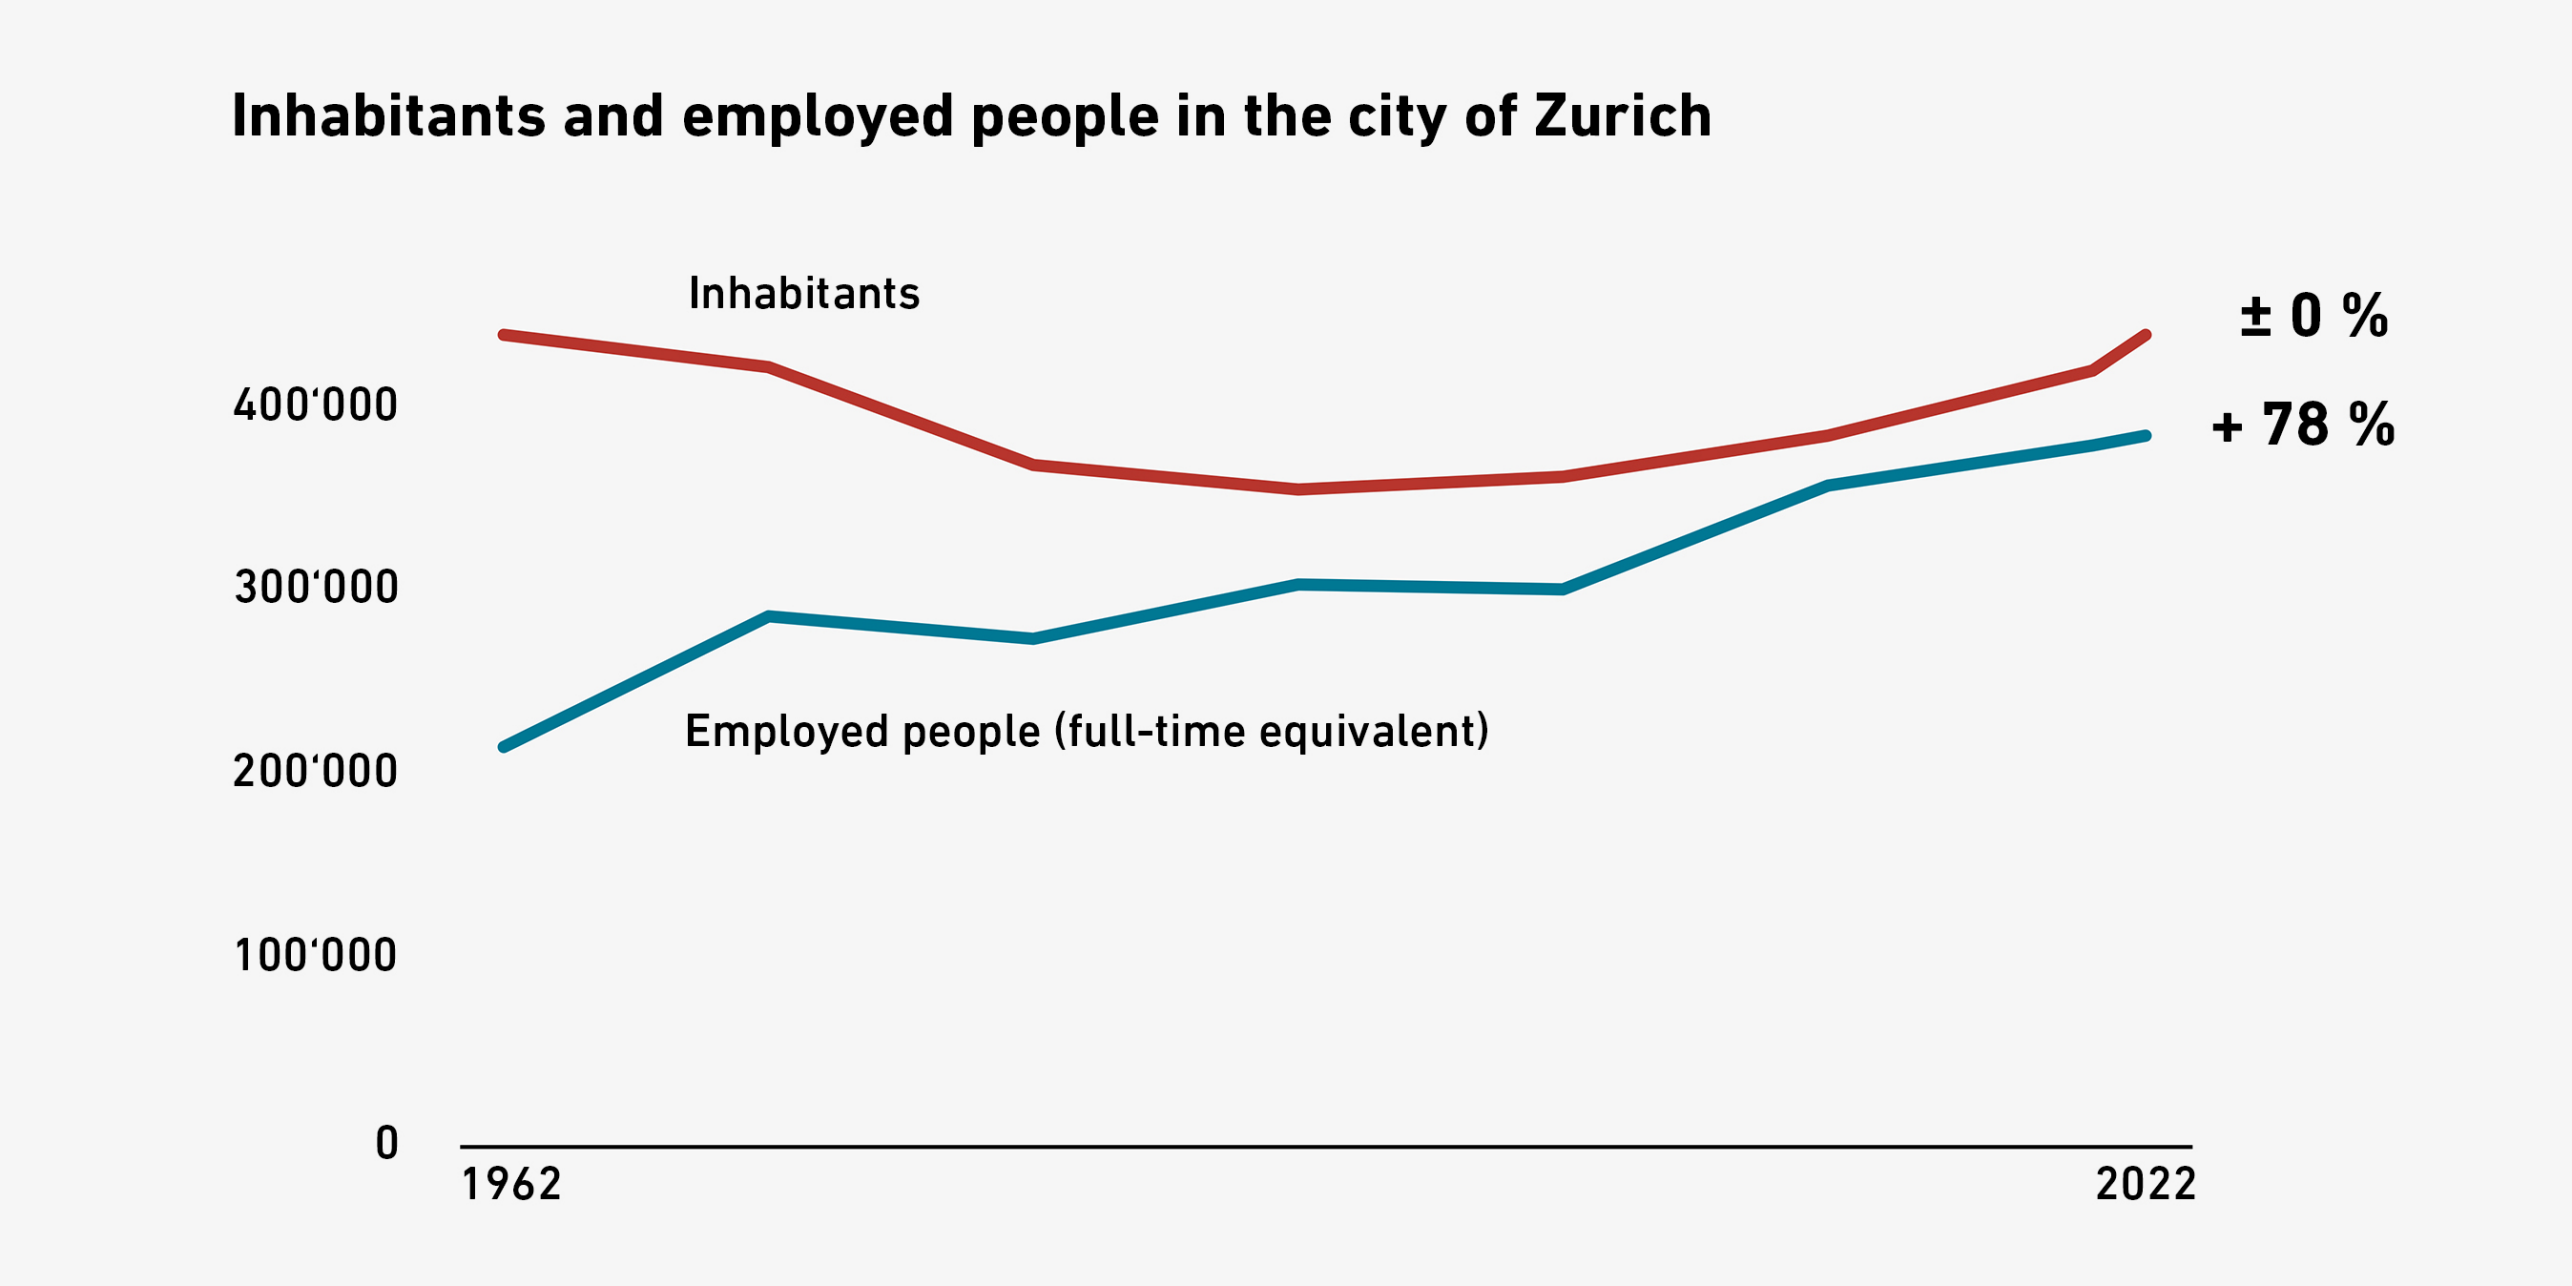 Graph showing trends in the number of inhabitants and the number of employees in Zurich.